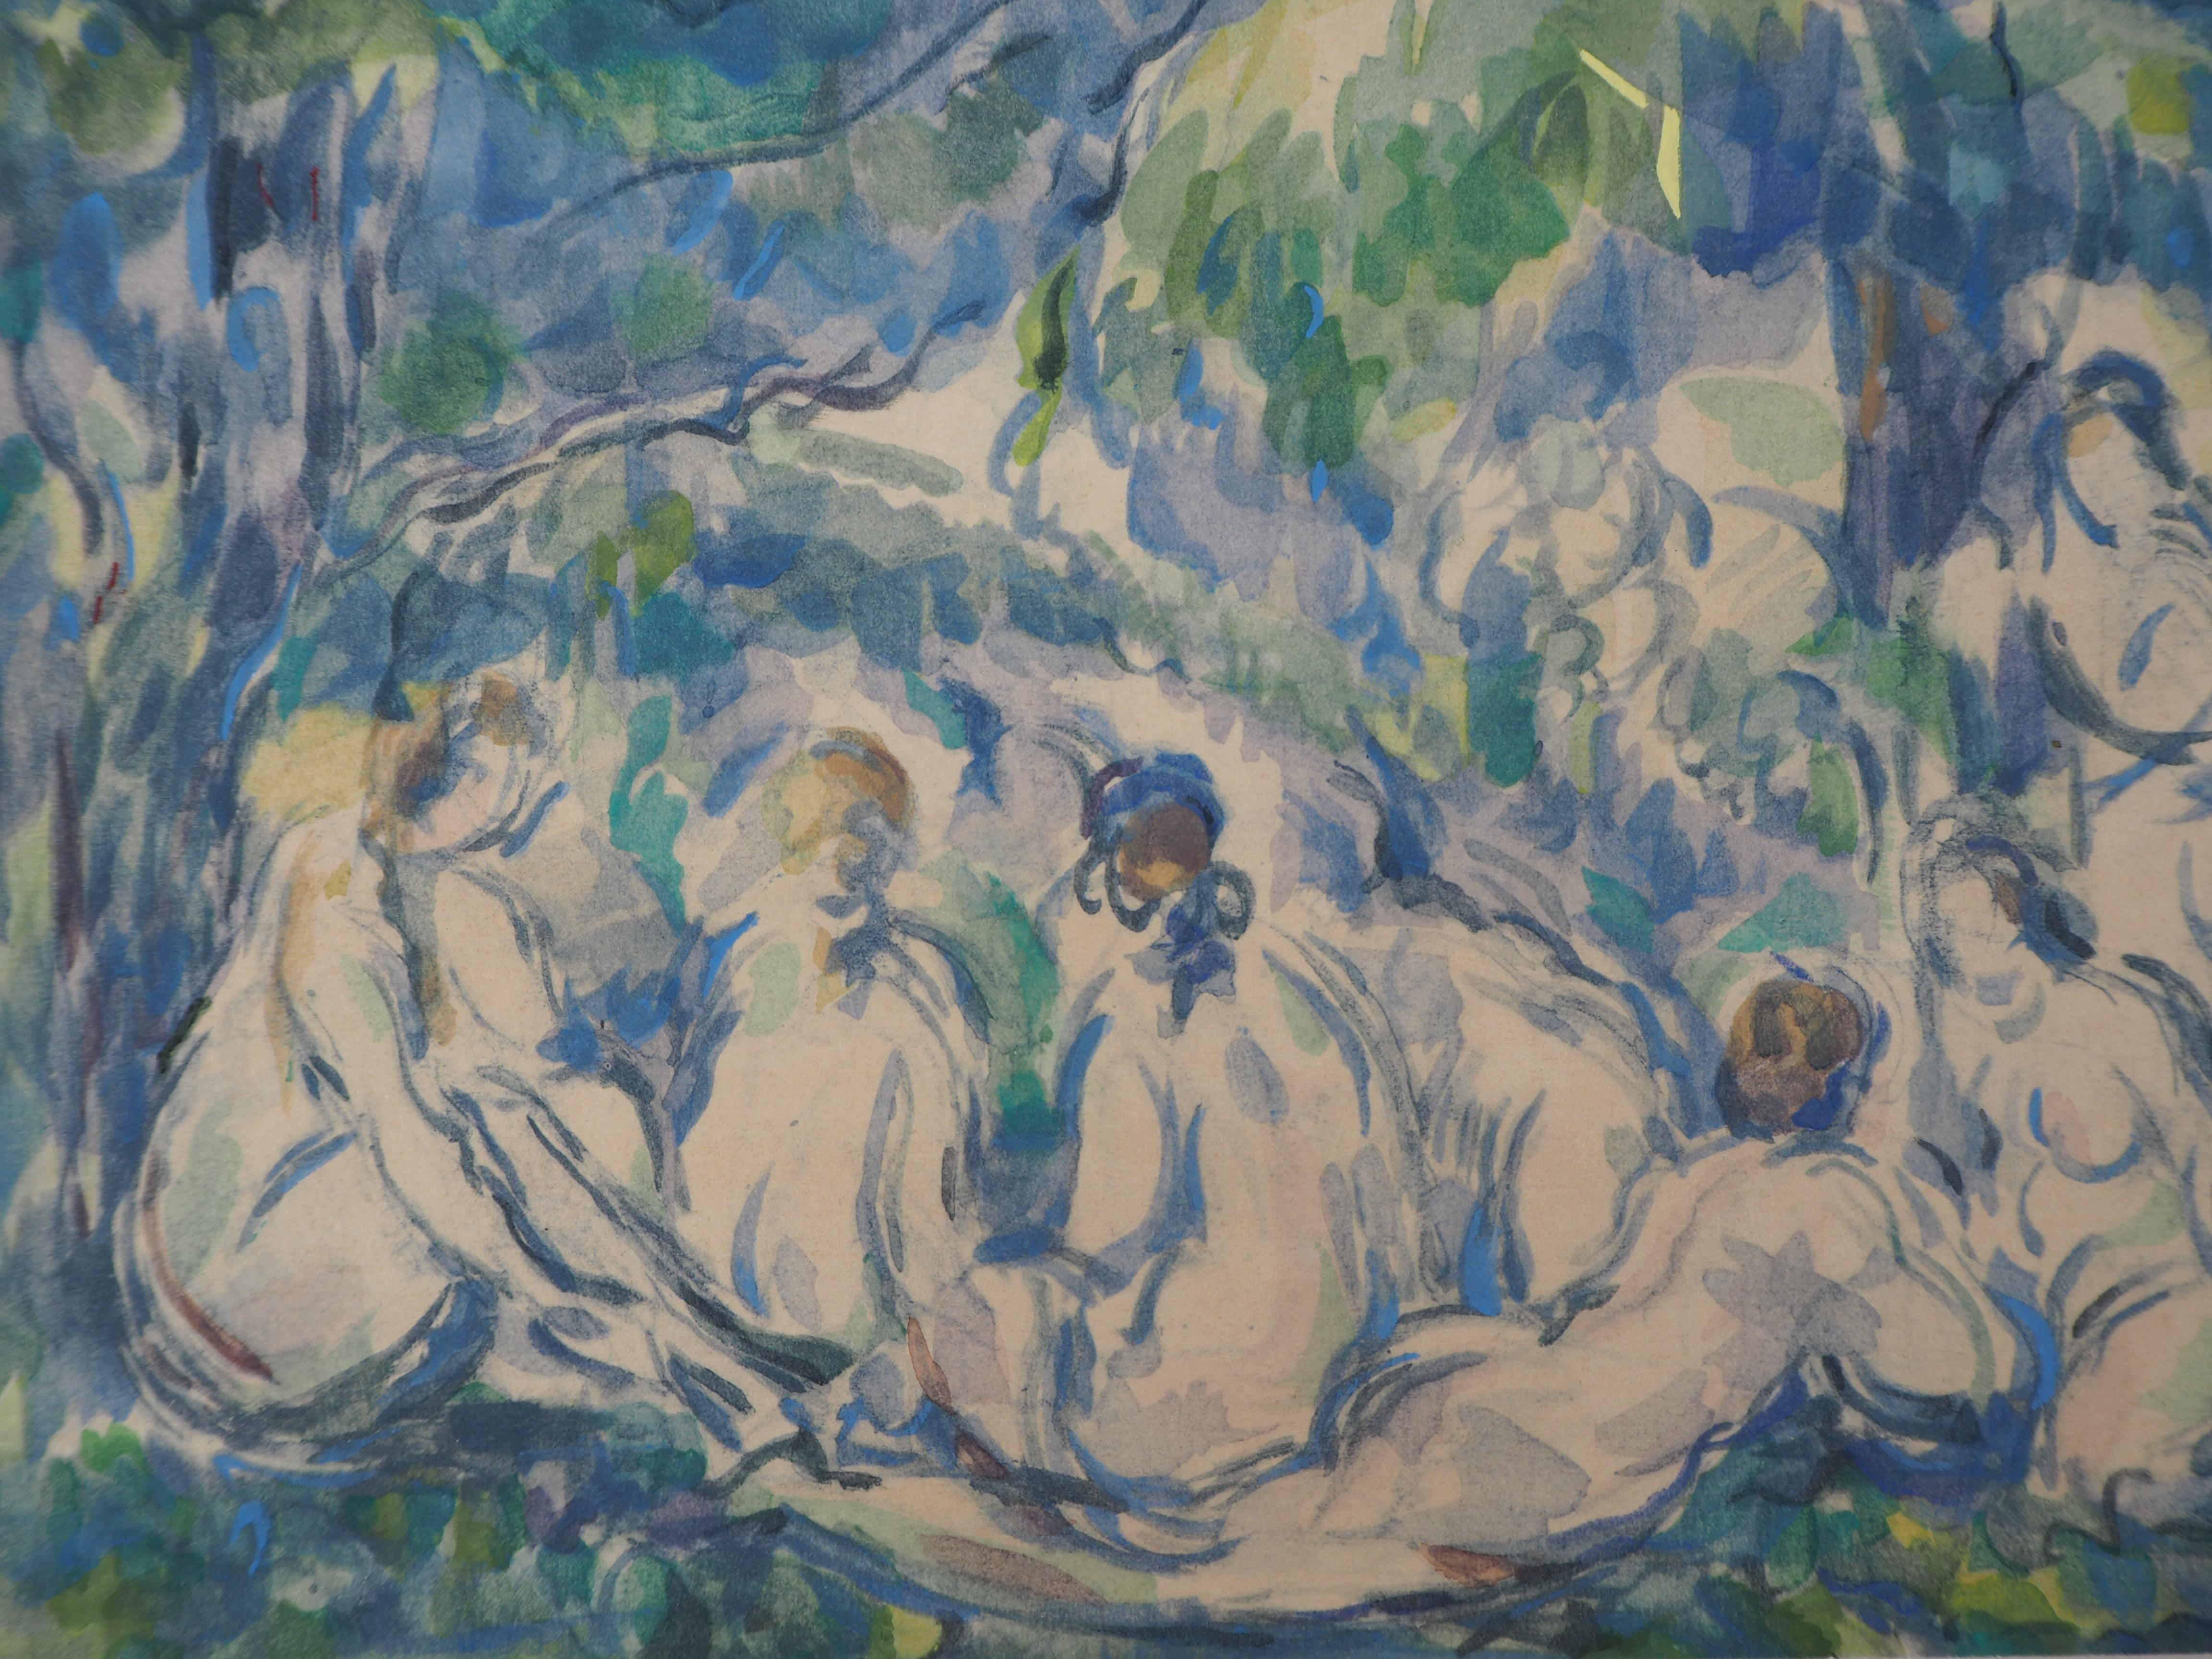 Group of Bathers Resting in a Forest - Lithograph and Stencil Watercolor, 1947 - Impressionist Print by After Paul Cezanne